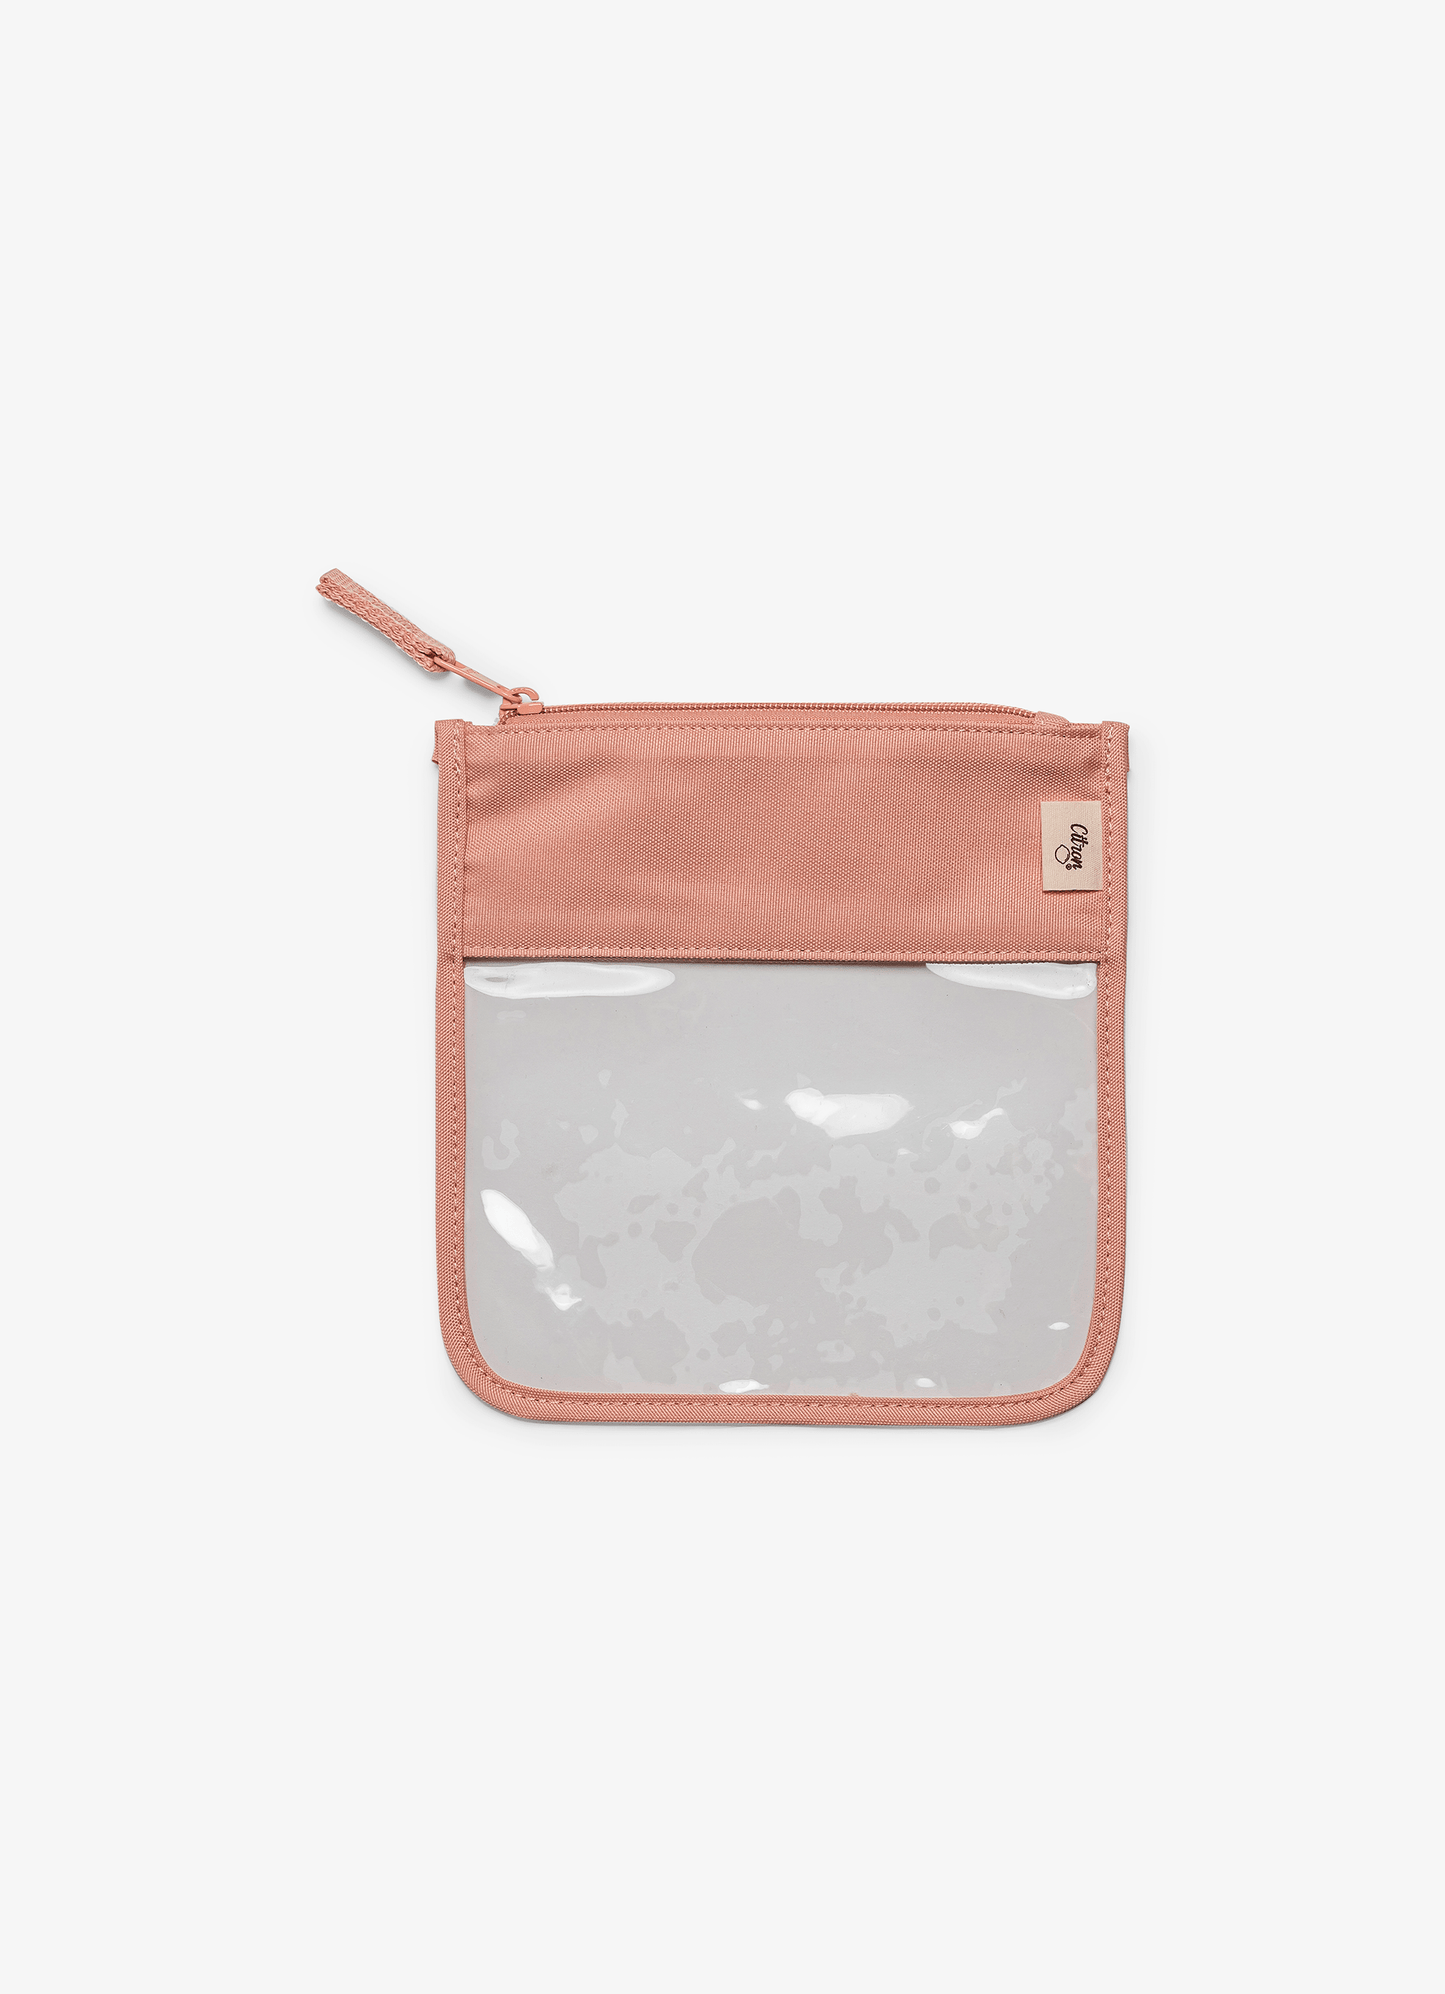 Clear Zipper Pouch - Small - Blush Pink